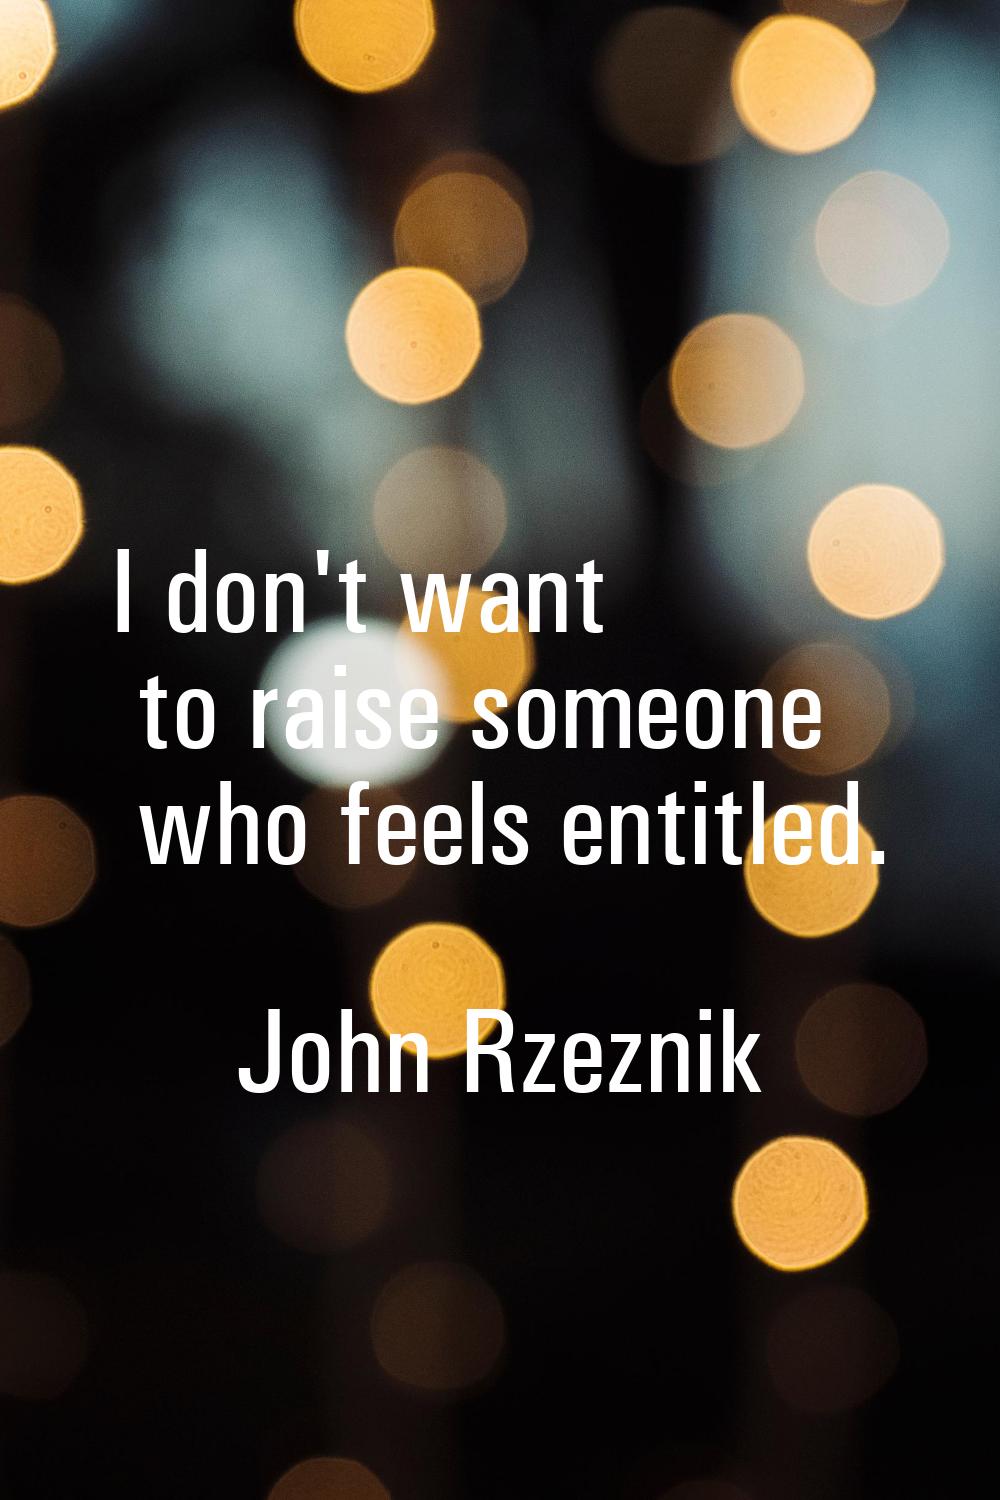 I don't want to raise someone who feels entitled.